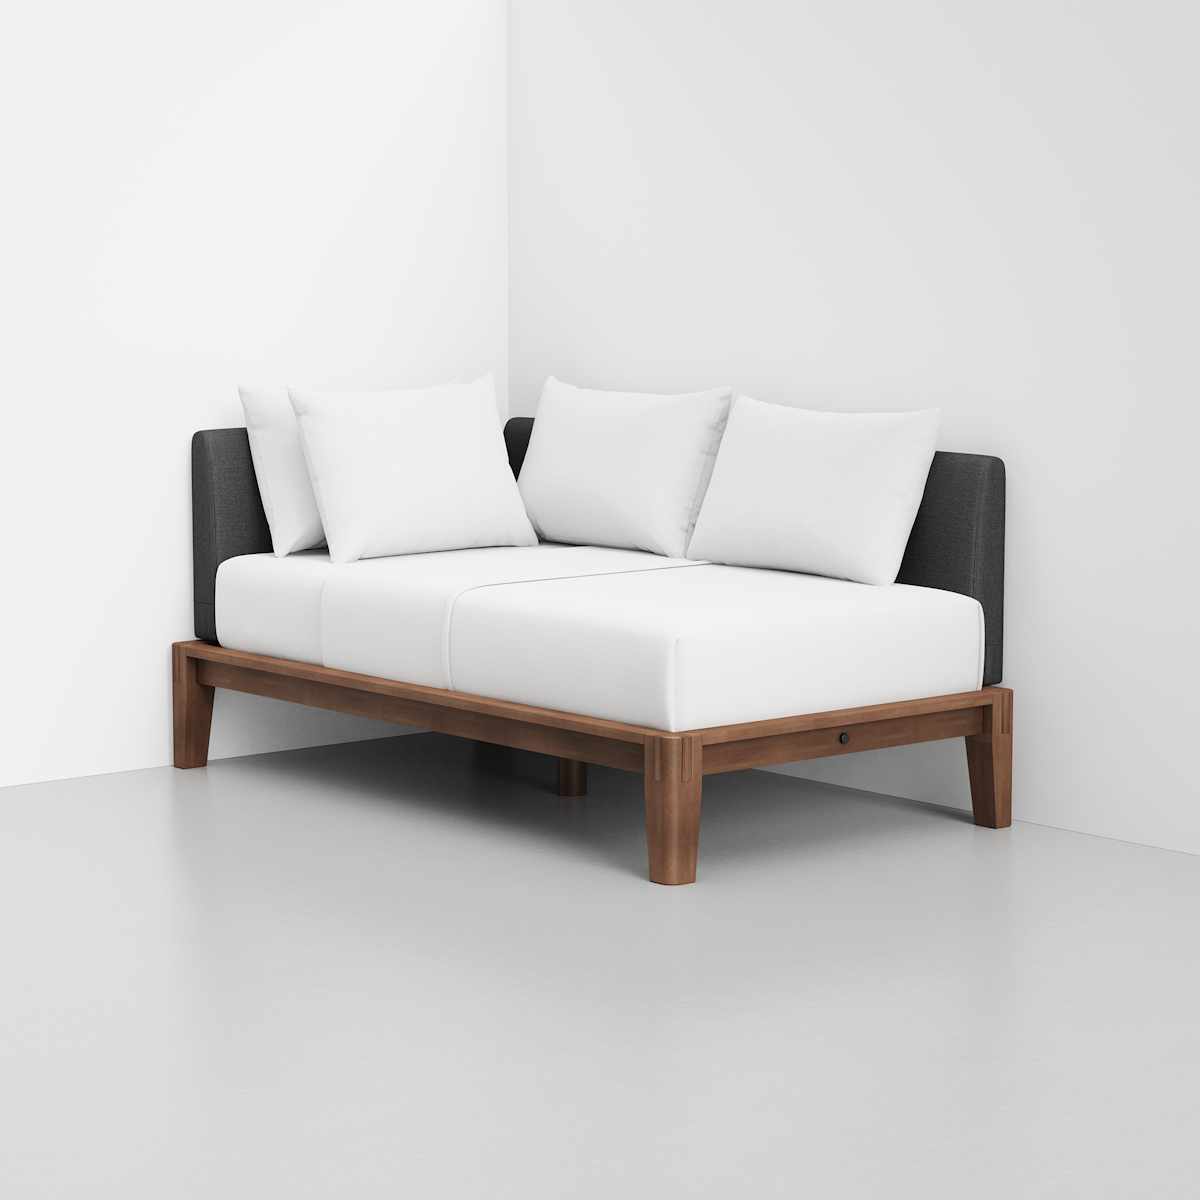 PDP Image: The Daybed (Walnut / Dark Charcoal) - Rendering - Pillows